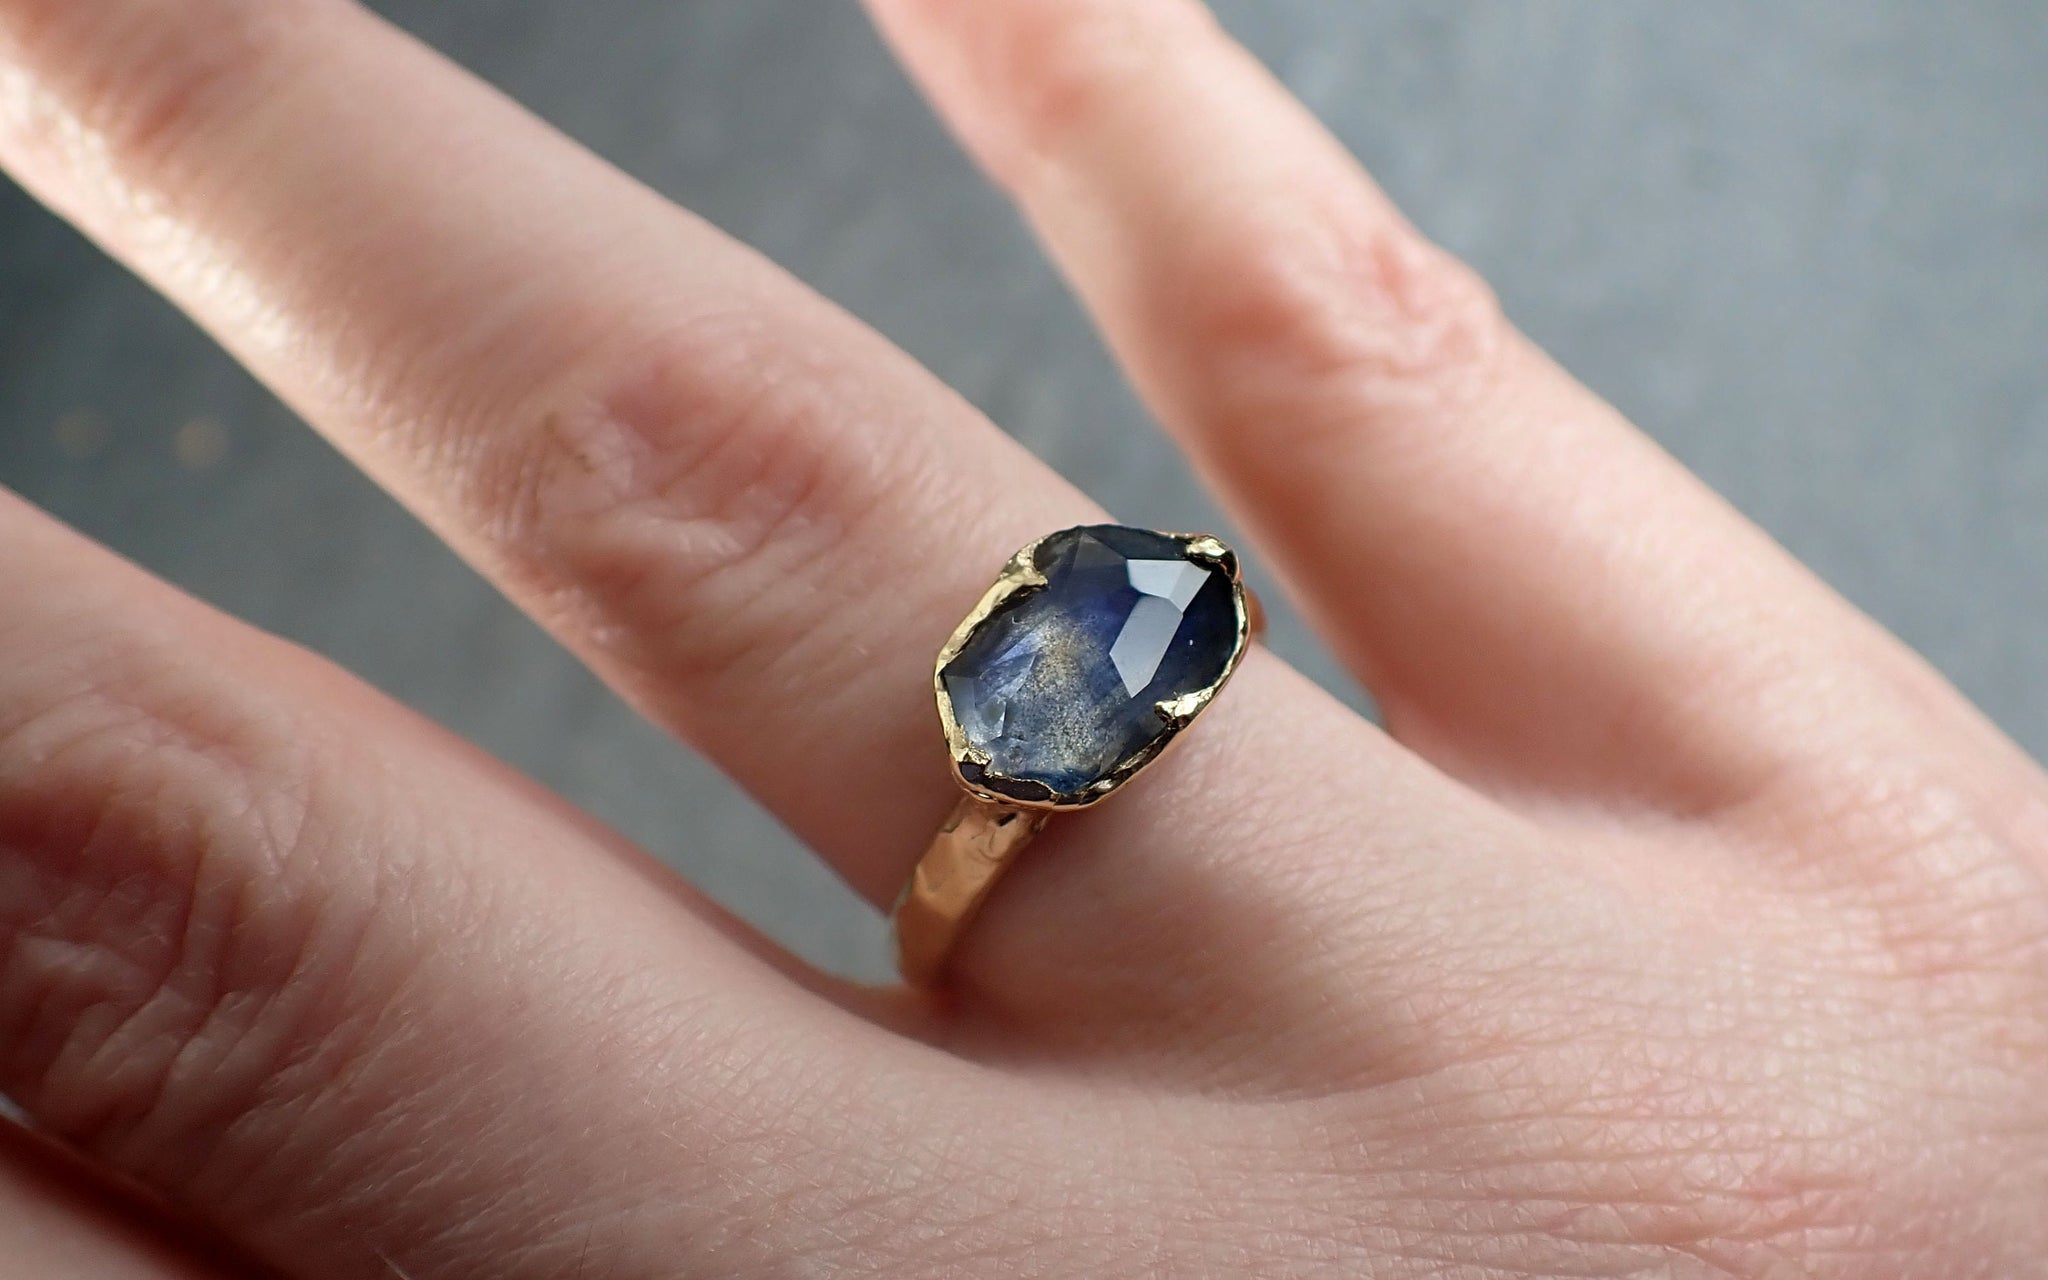 Partially faceted blue Montana Sapphire 18k Yellow Gold Solitaire Engagement Wedding Ring Gemstone Ring 2983